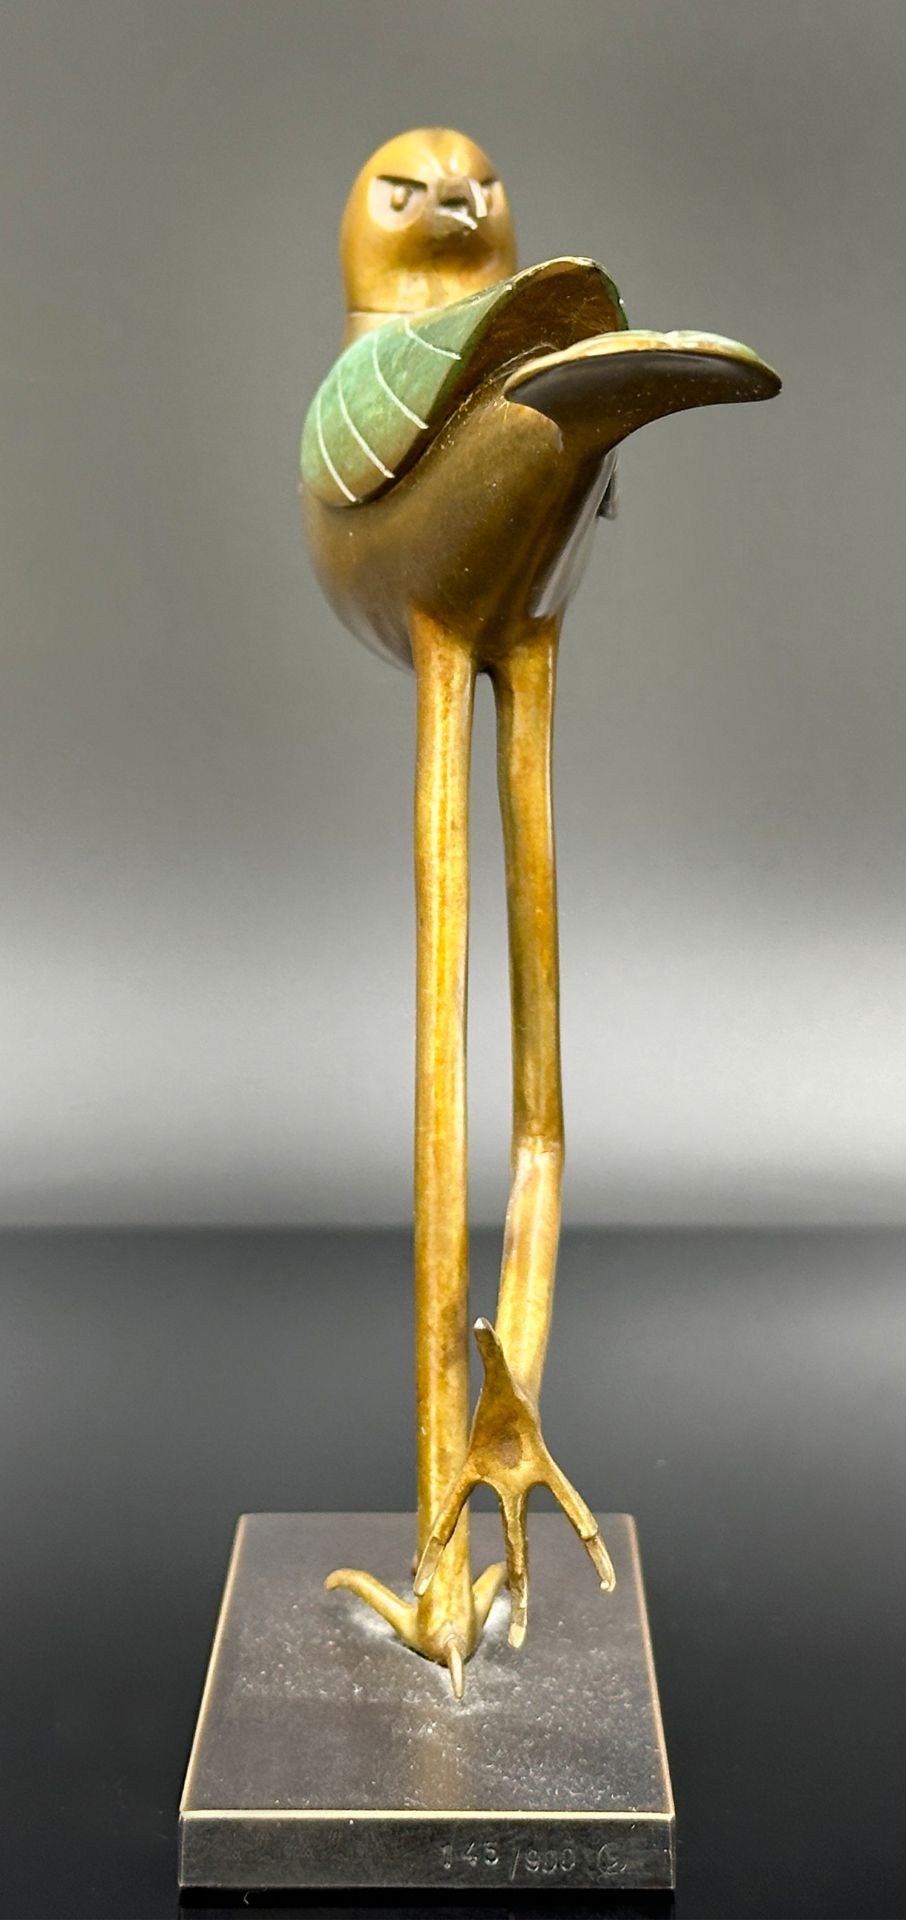 Paul WUNDERLICH (1927 - 2010). Bronze. "Seagull". 2008. - Image 2 of 8